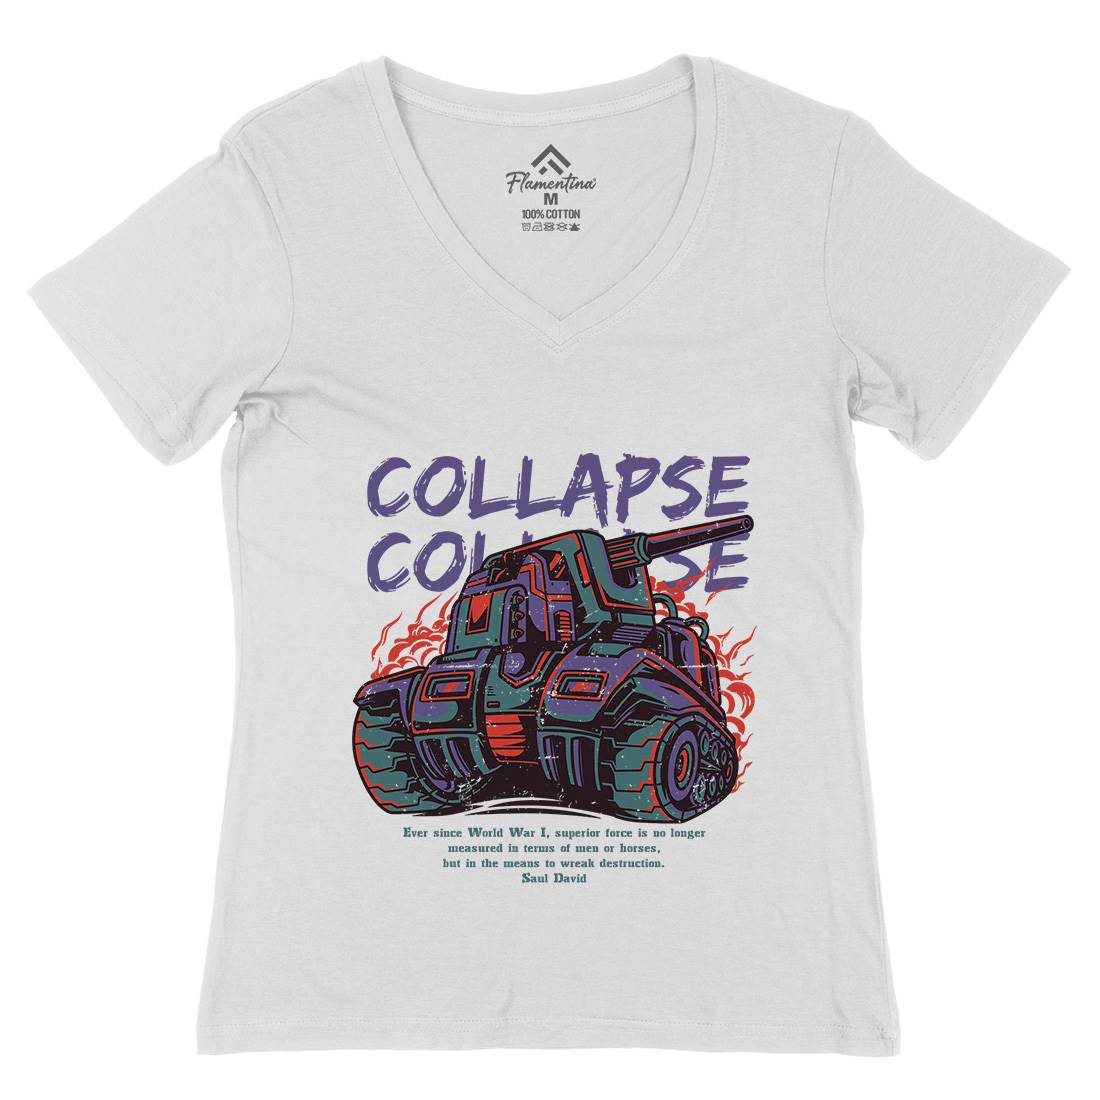 Collapse Womens Organic V-Neck T-Shirt Army D728